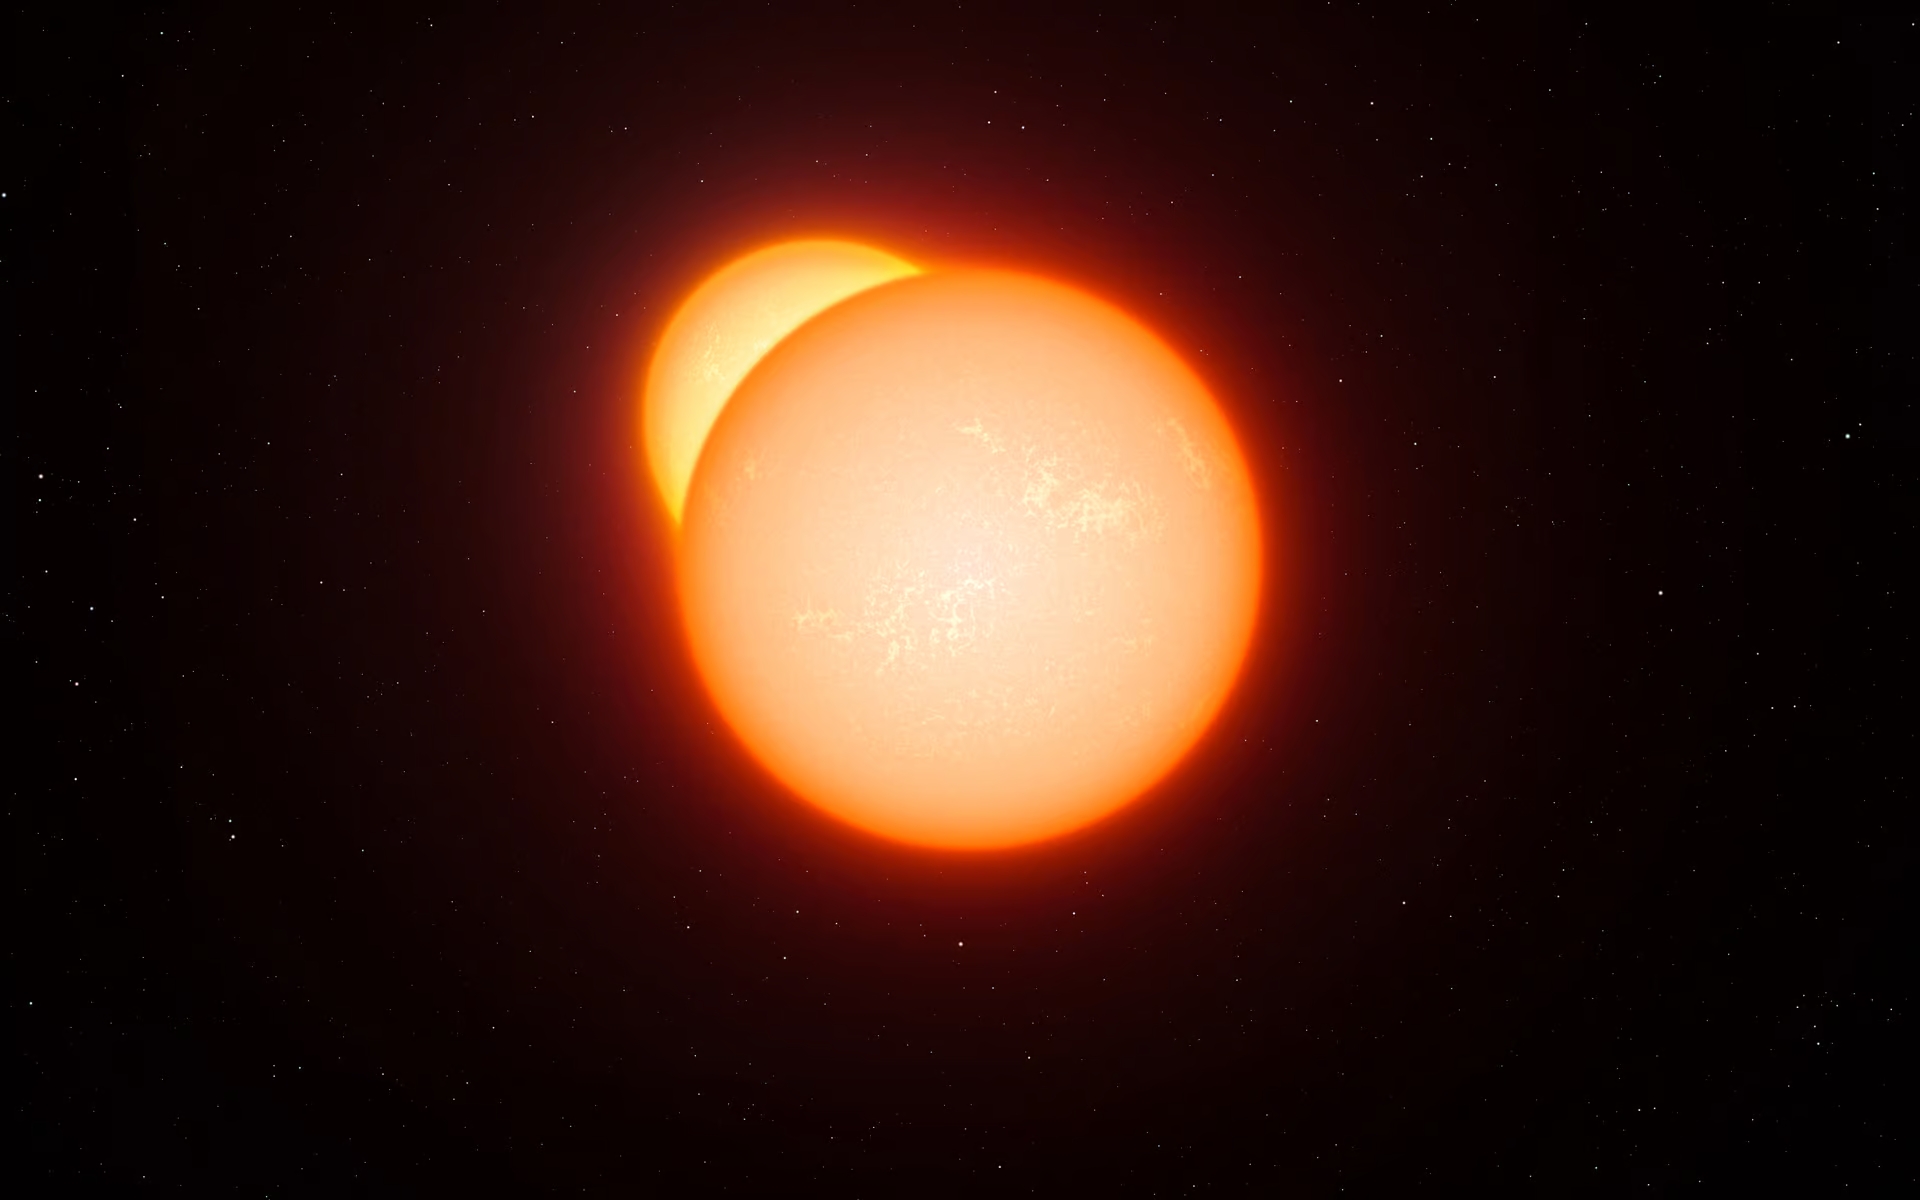 Astronomers discover two invisible ultra-cold stars with temperatures of less than 2,430 degrees Celsius and ages of 4-5 billion years